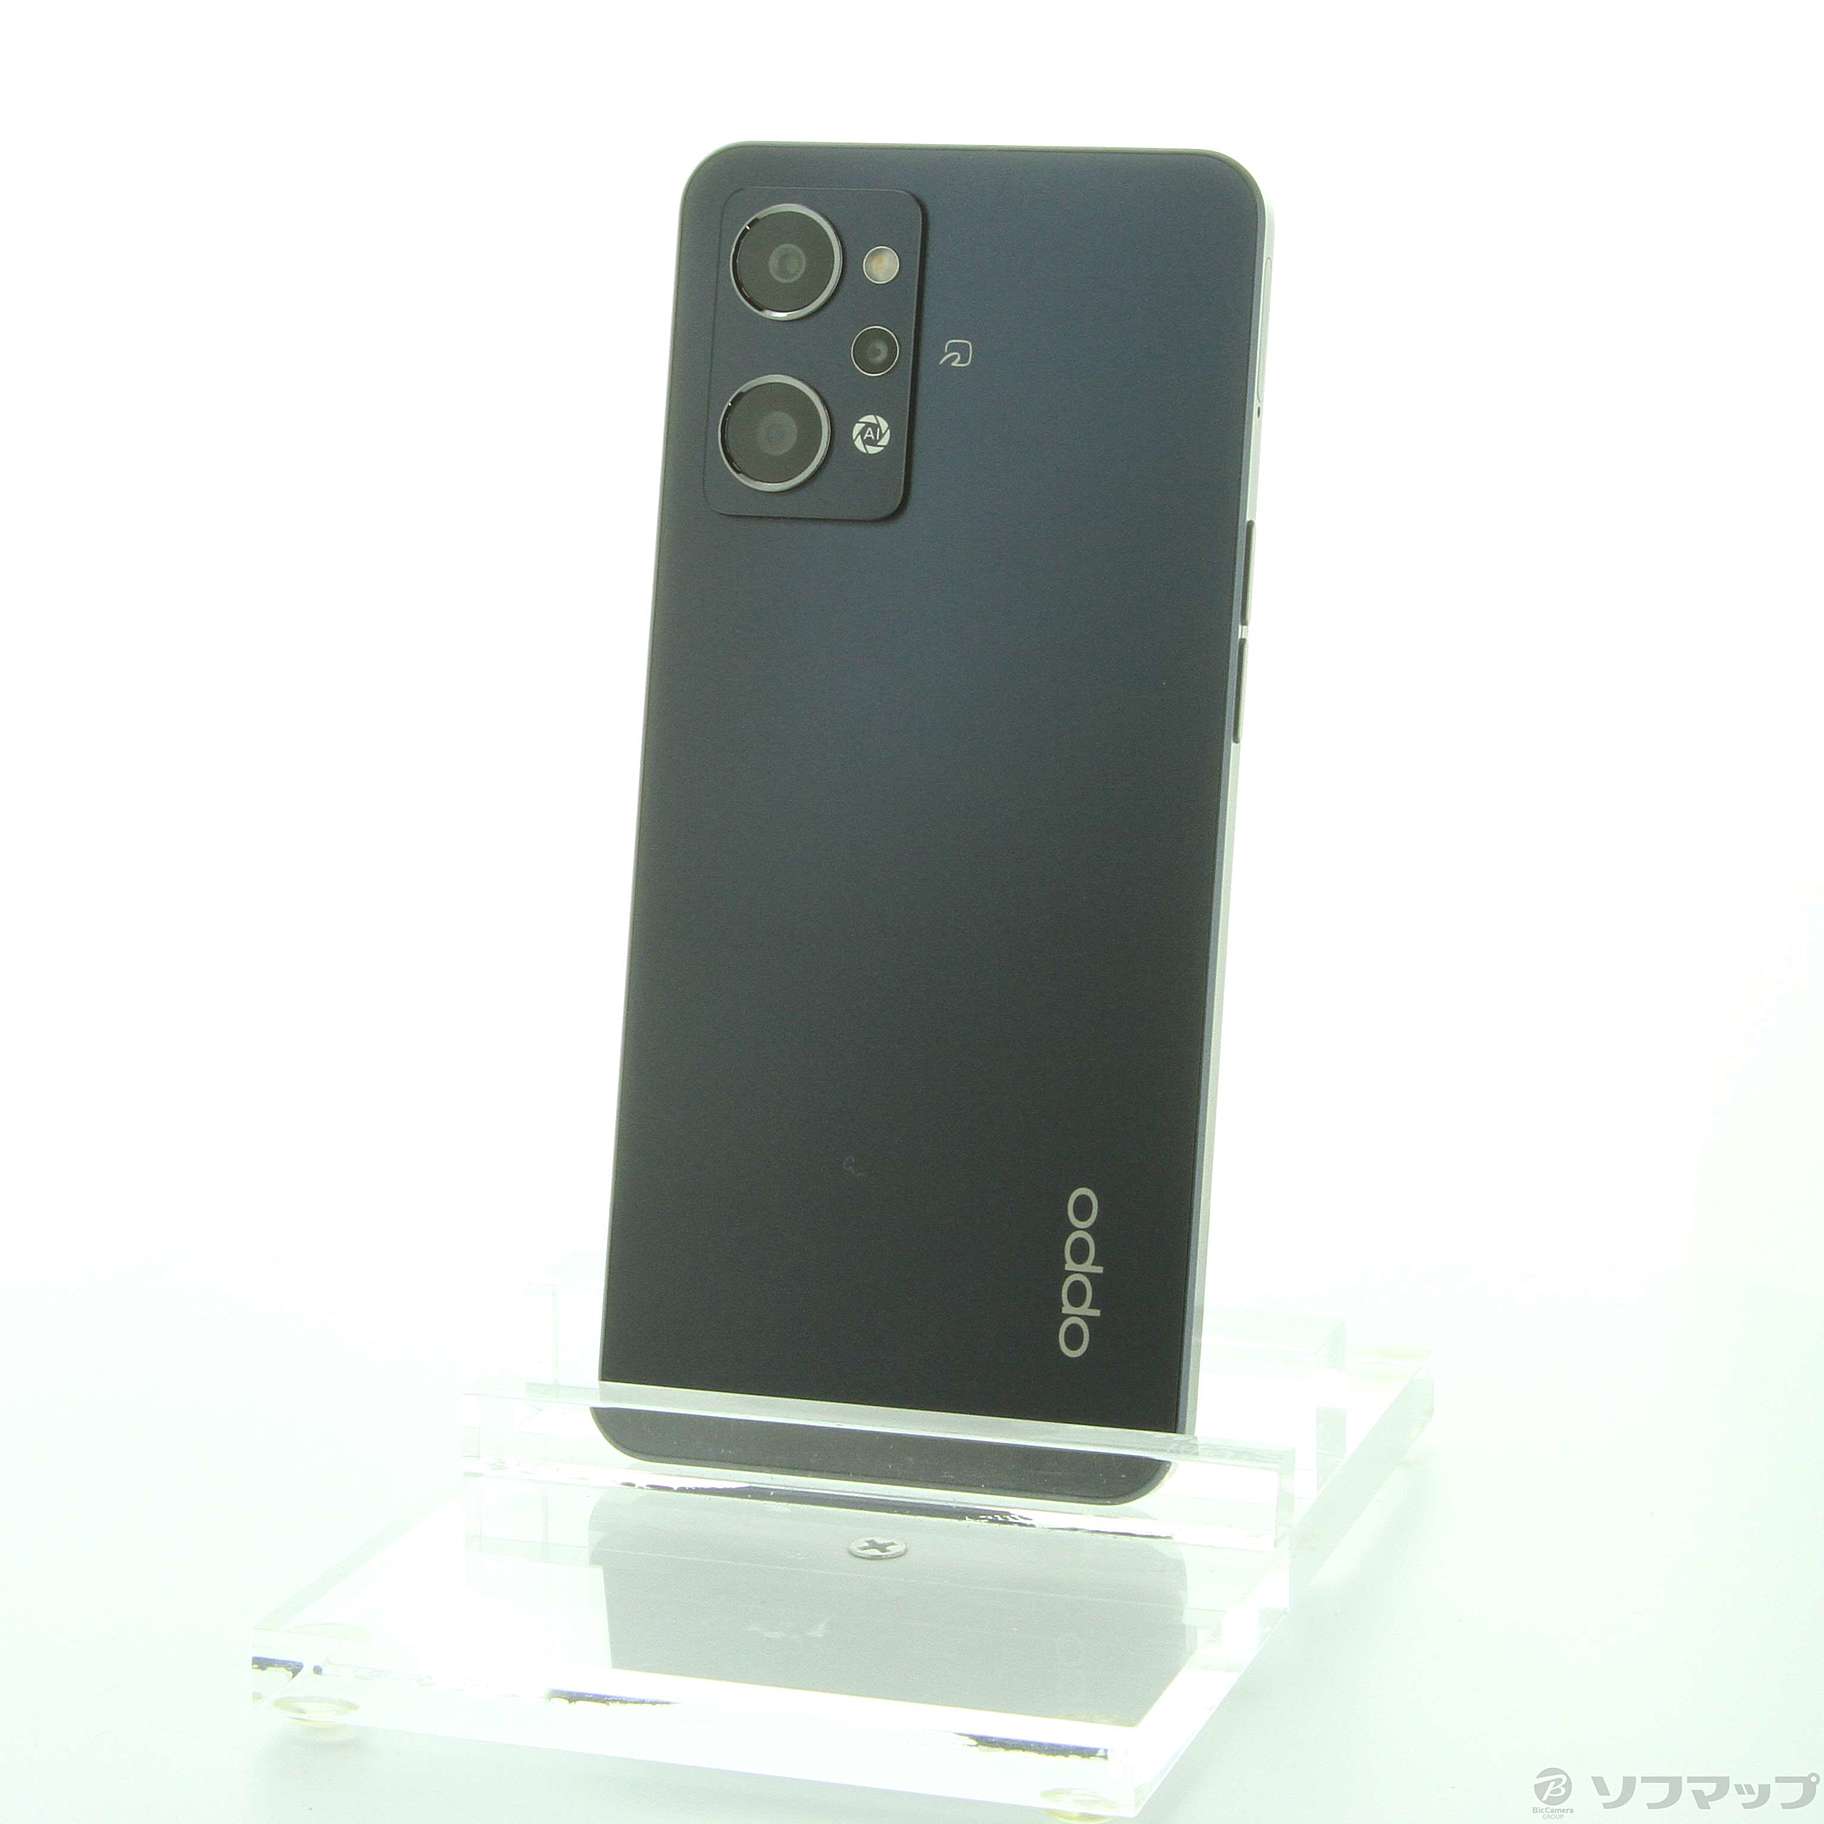 OPPO Reno7 A スターリーブラック Y!mobile